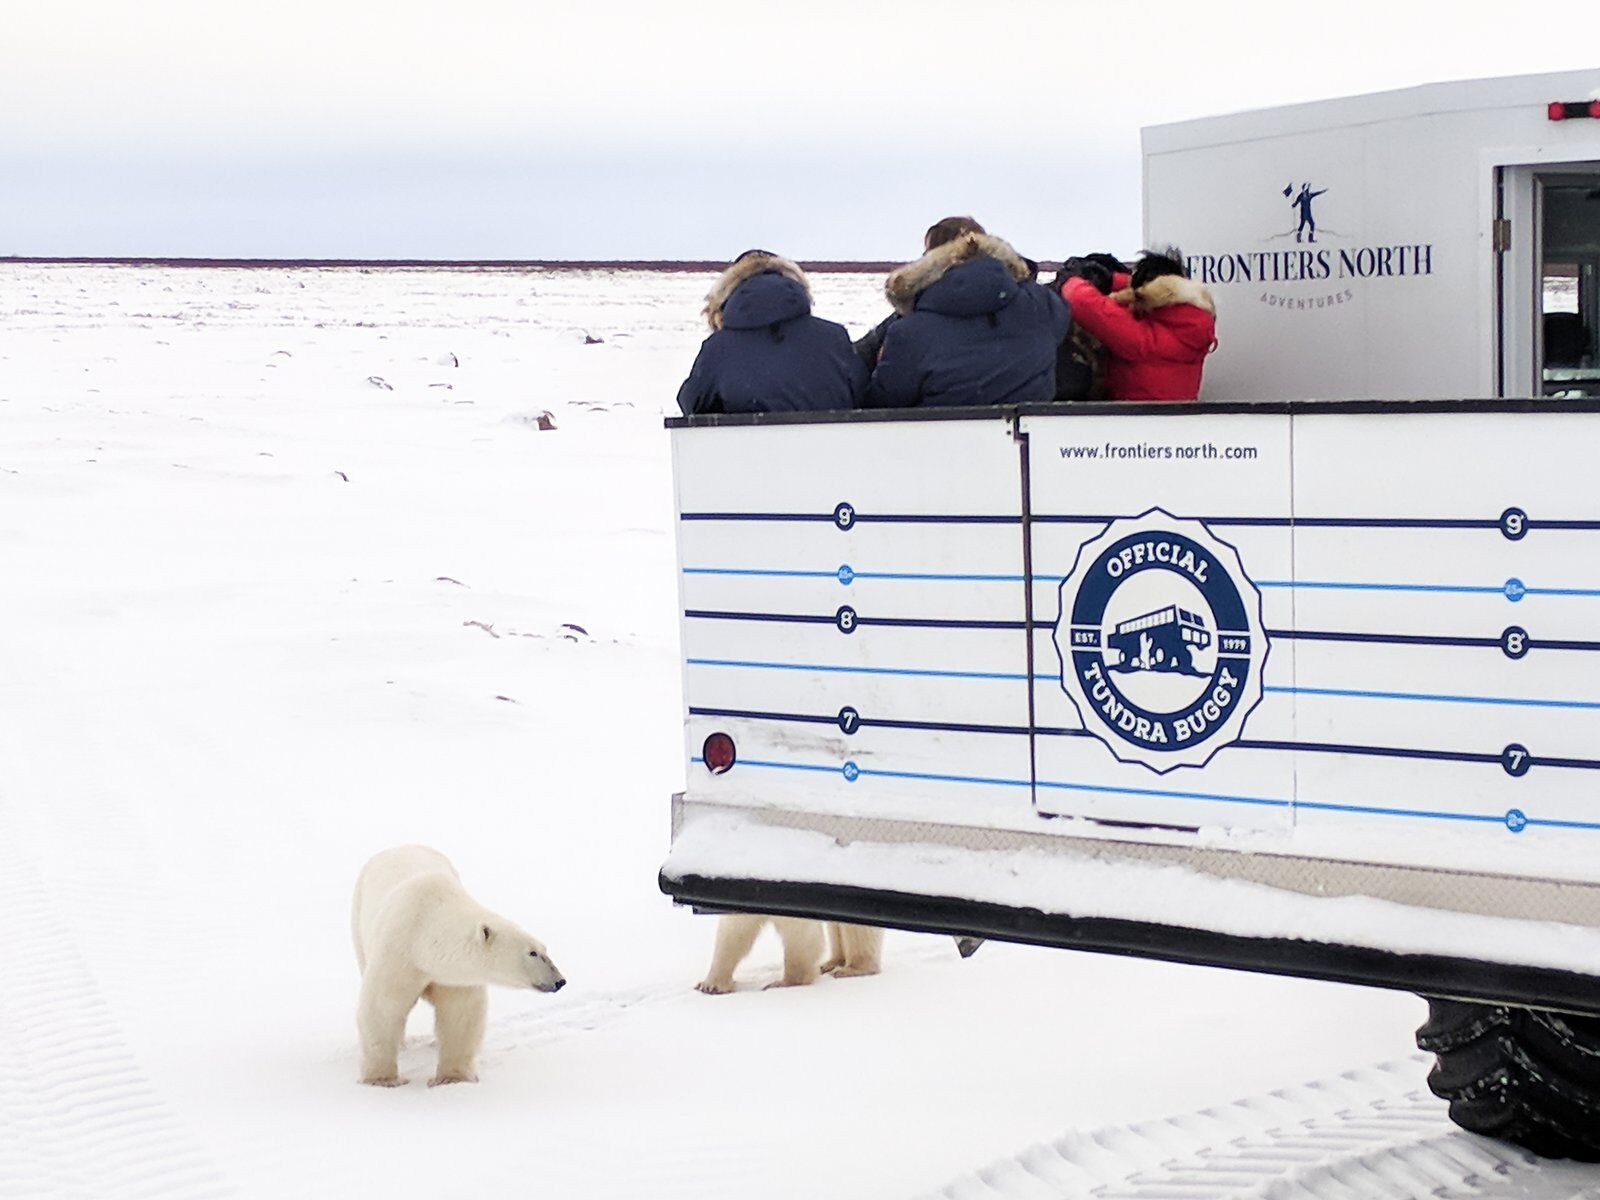 tourists in a buggy viewing polar bears in canada 